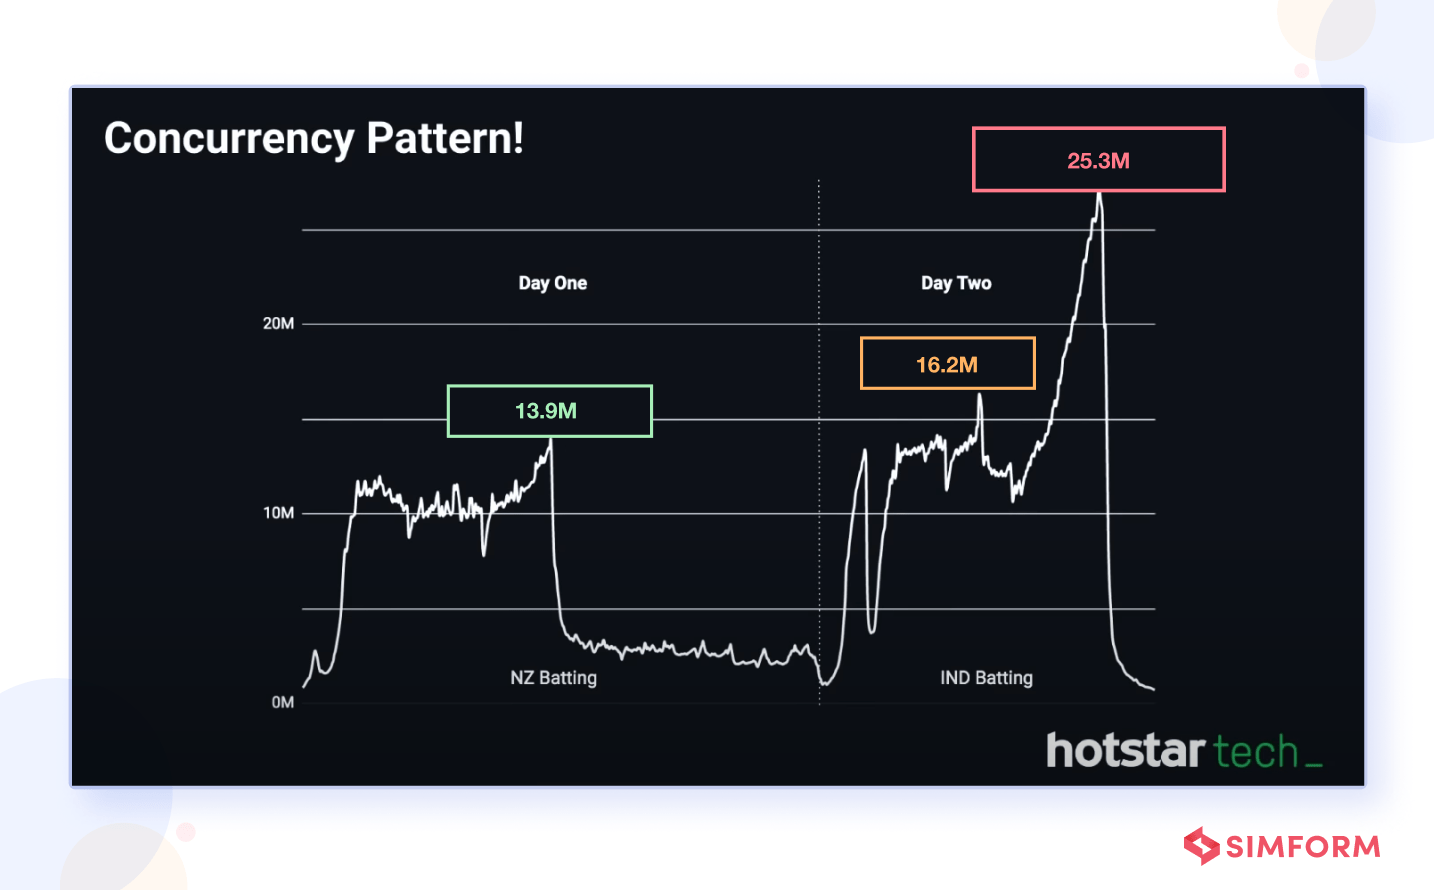 Concurreny Pattern of Hotstar